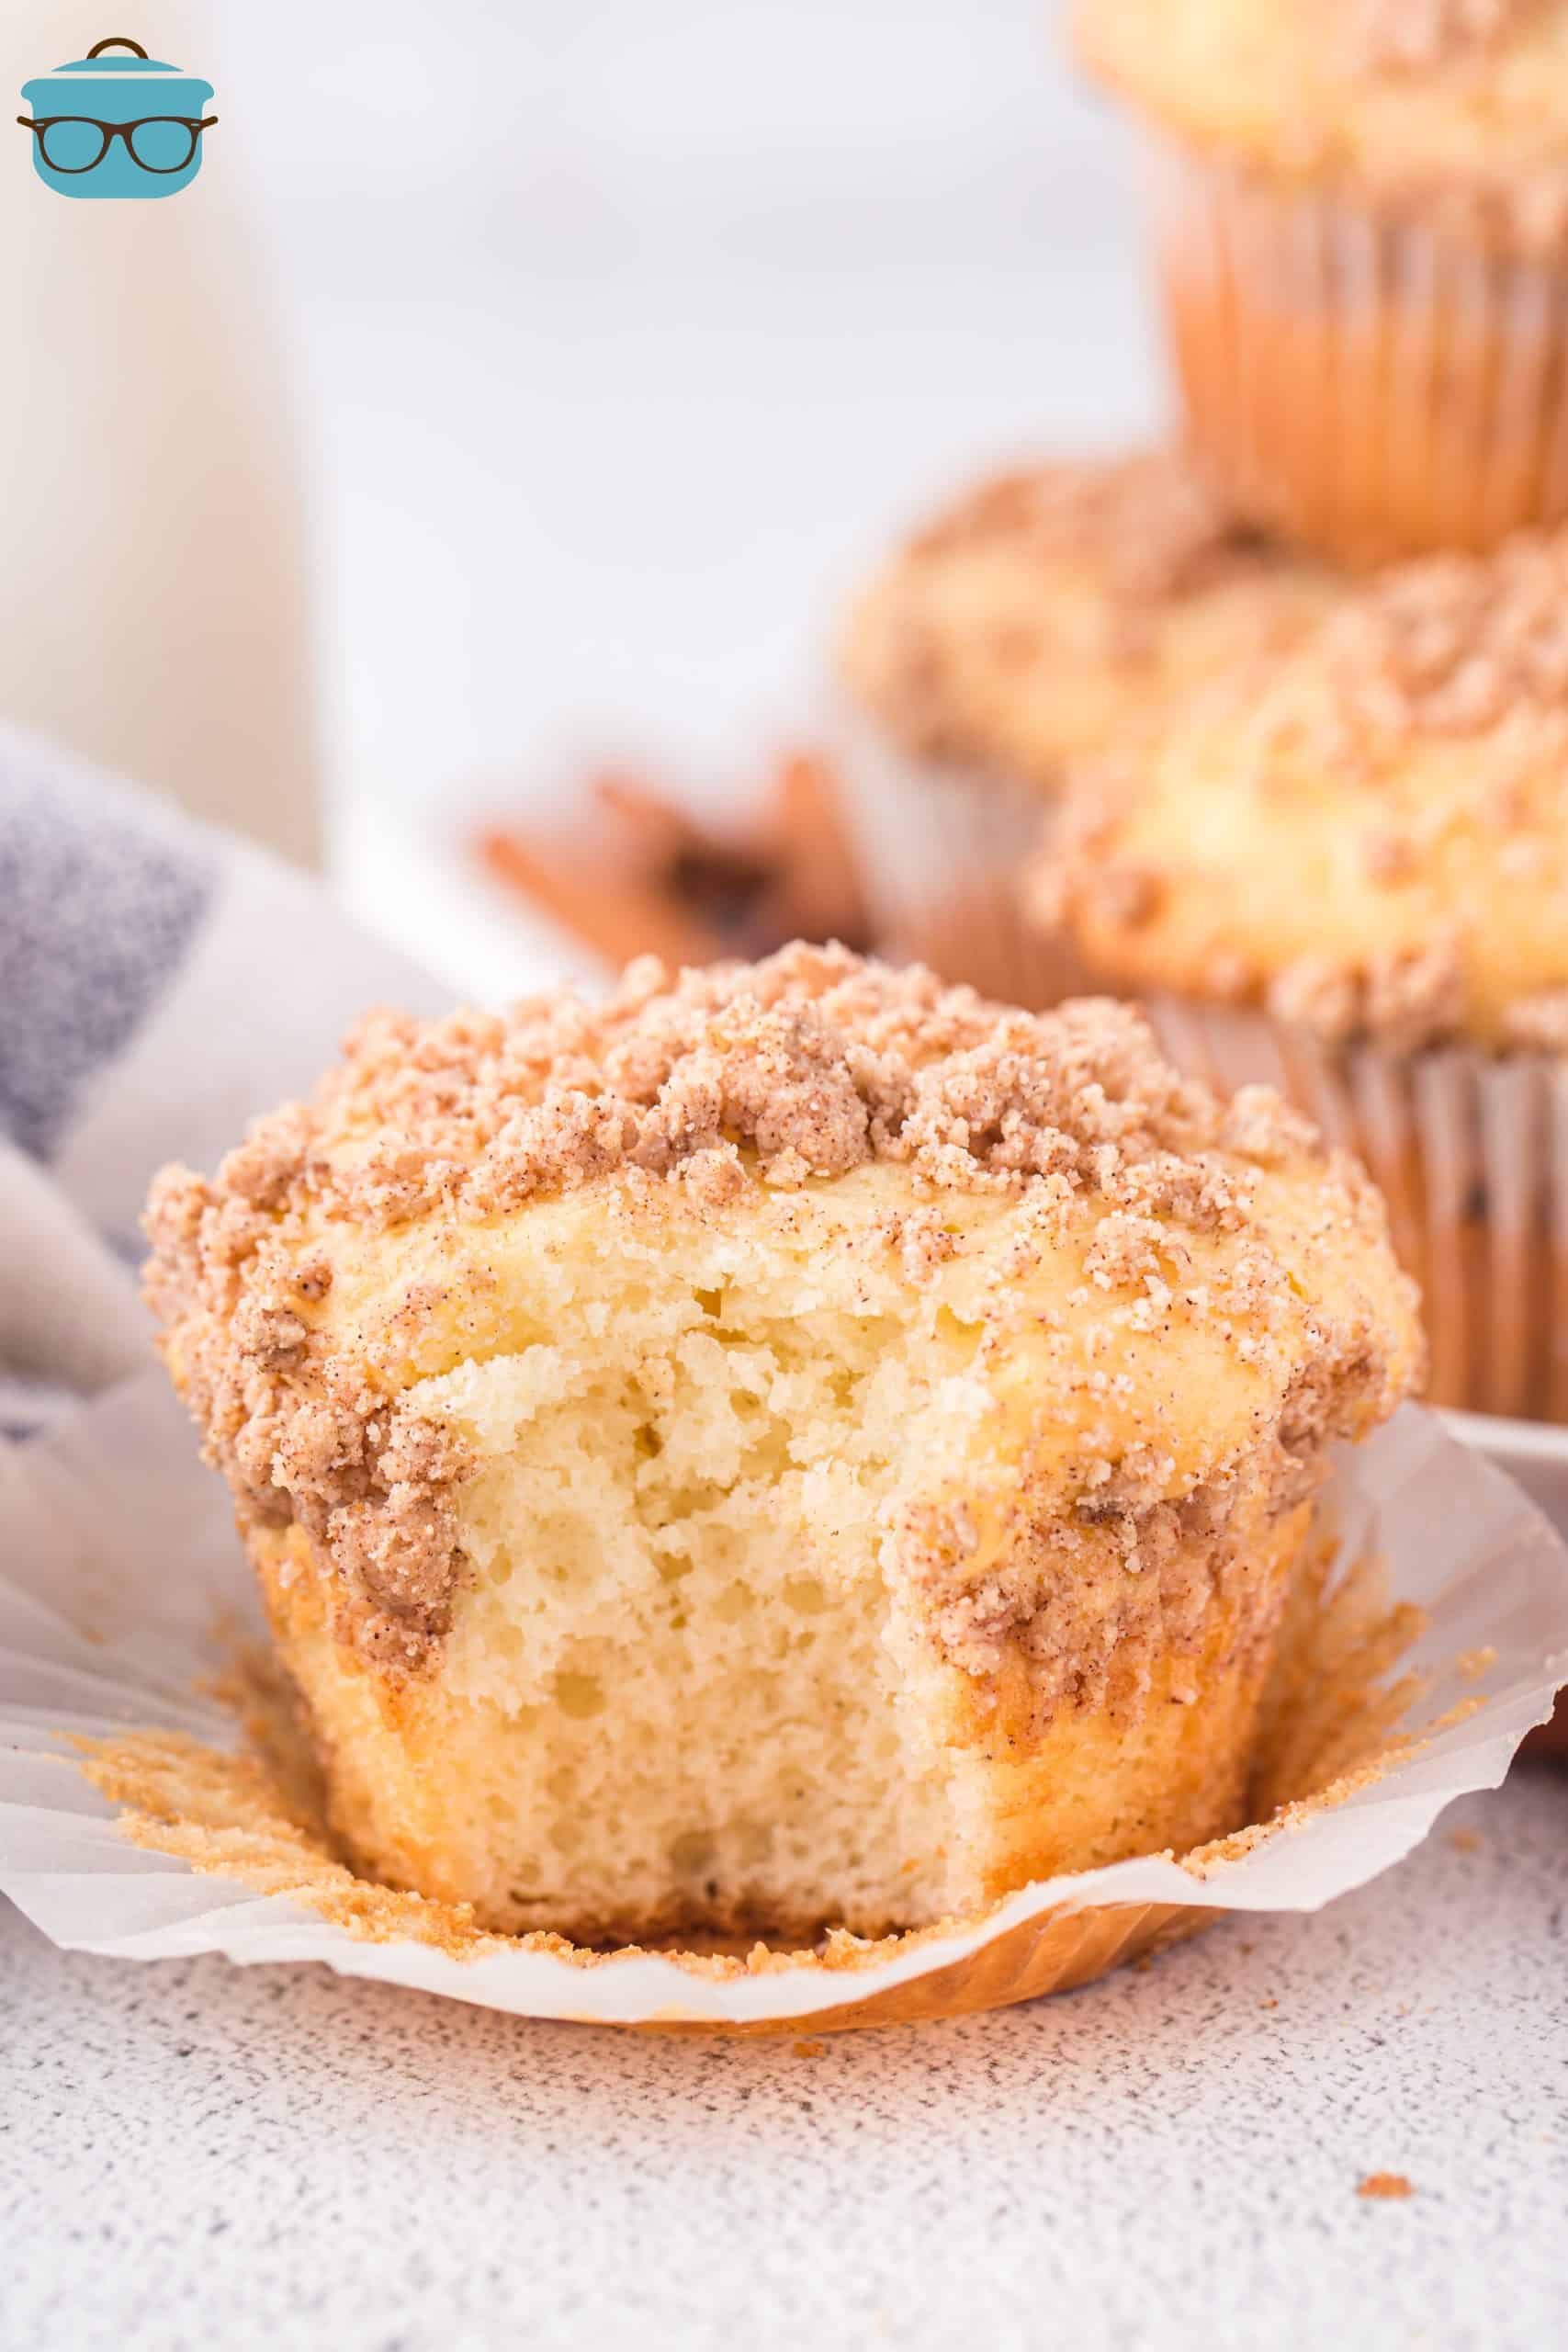 A Cinnamon Streusel Cake Mix Muffin with a bite missing.